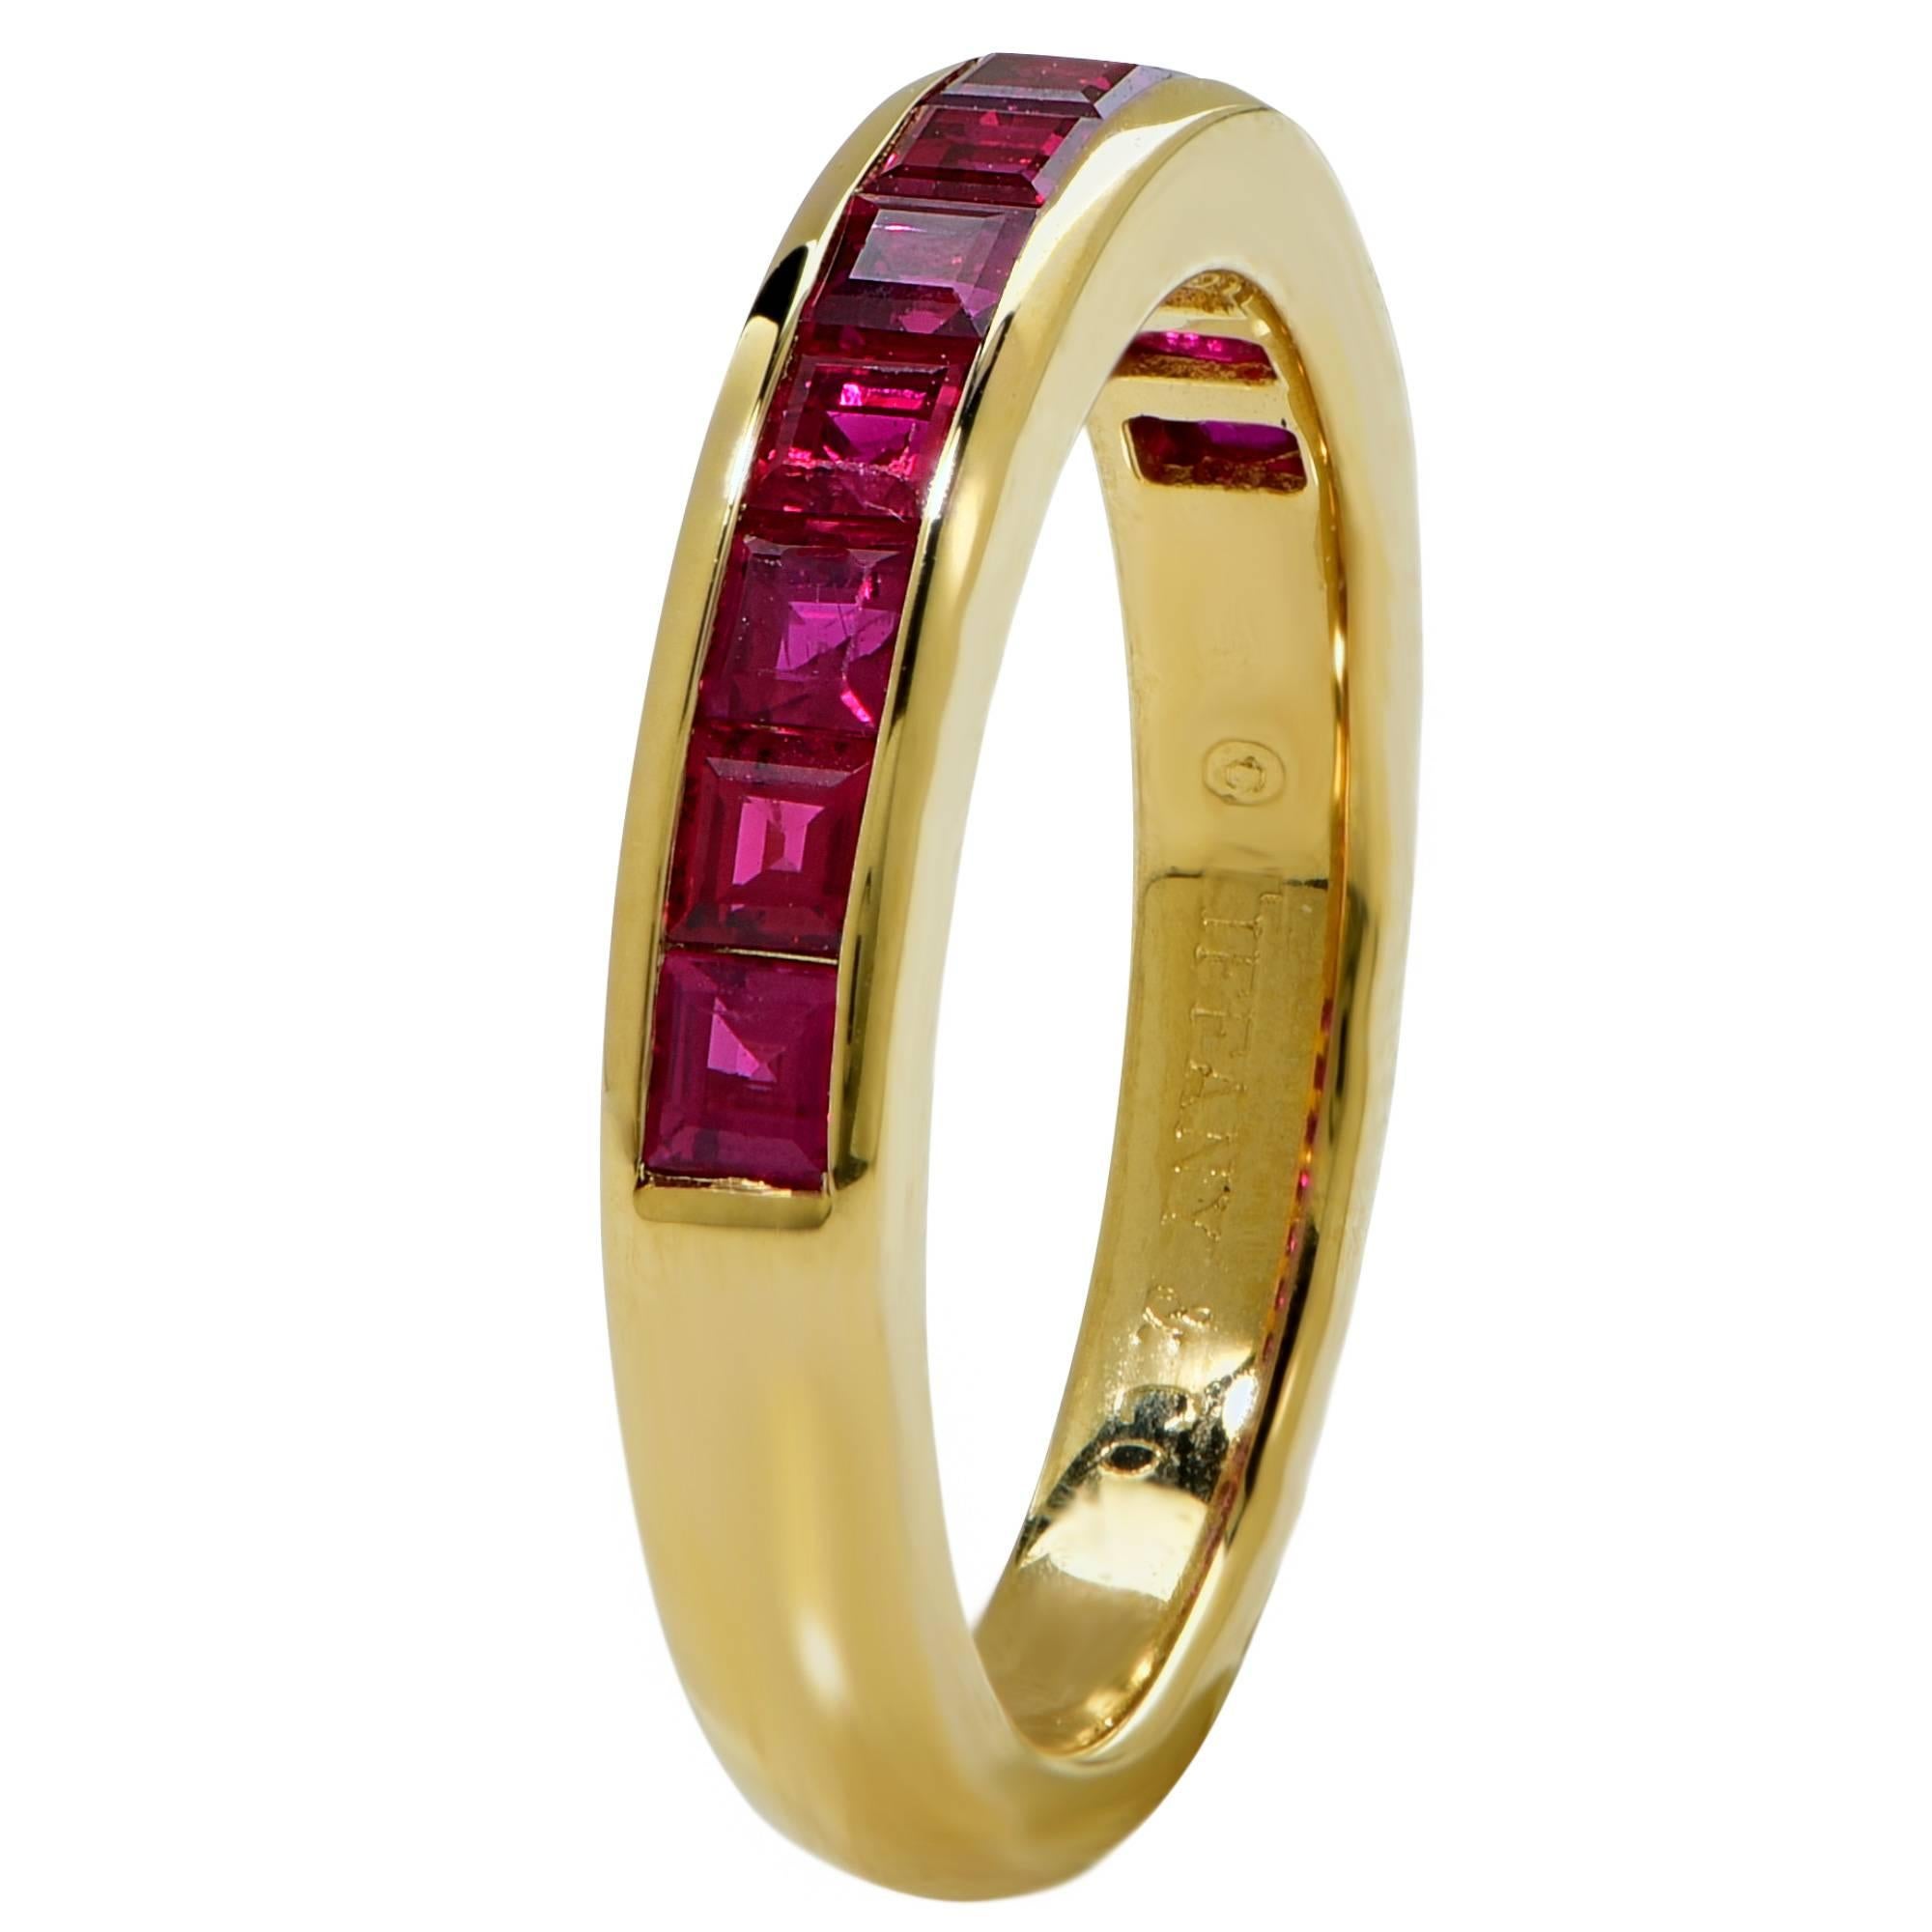 18k yellow gold Tiffany & Co. band featuring 11 rubies weighing approximately 1ct total.

The ring is a size 5 and cannot be sized.
It is stamped and tested as 18k gold.
The metal weight is 3.74 grams.

This ruby band is accompanied by a